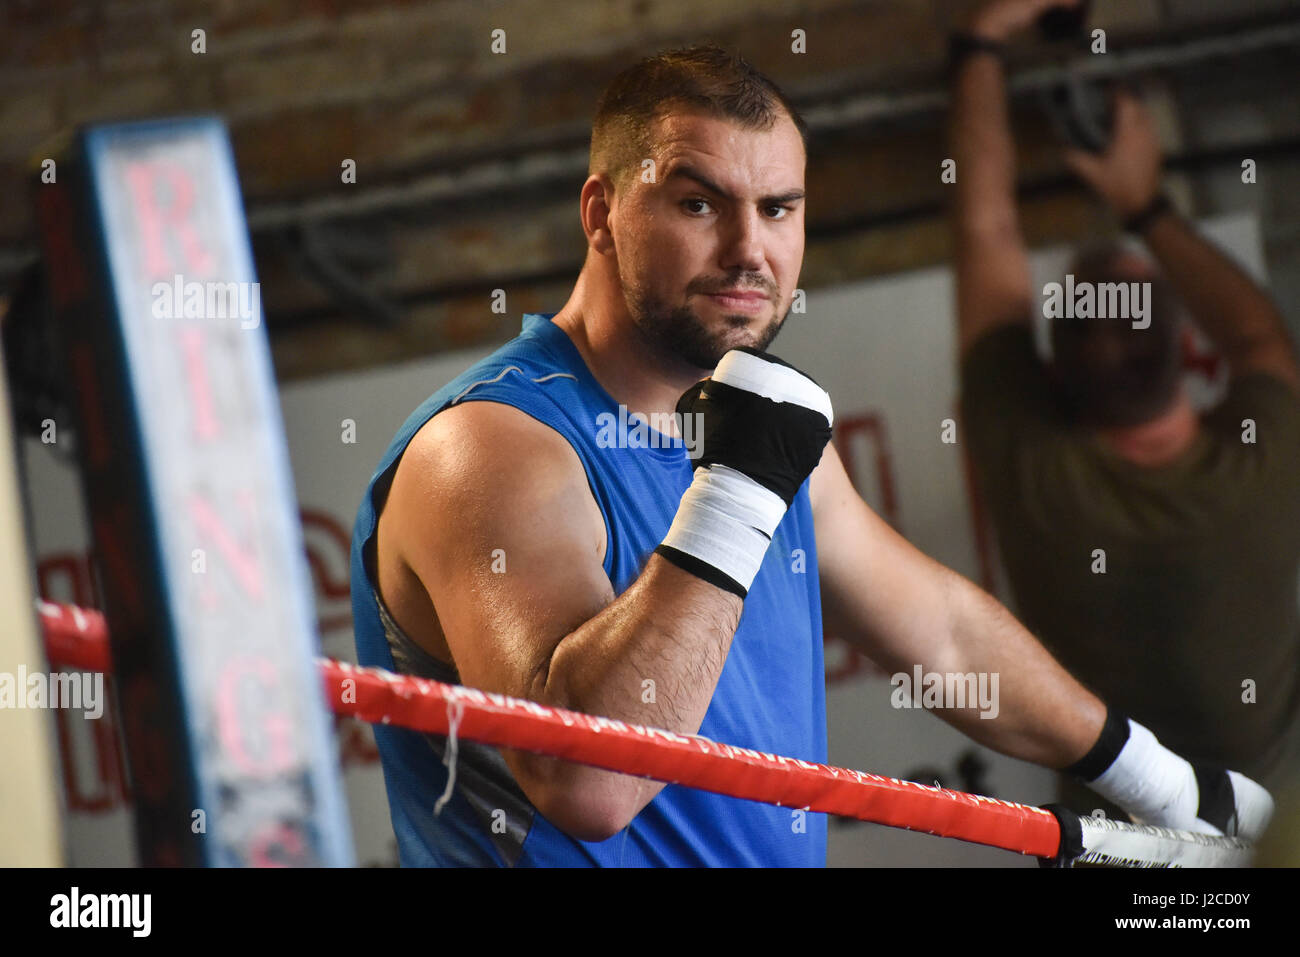 Auckland, New Zealand. 27th Apr, 2017. New Zealand heavyweight boxer Joseph  Parker's opponent Razvan Cojanu poses for camera during a media workout at  Boxing Alley in Auckland on Apr 27, 2017. Credit: